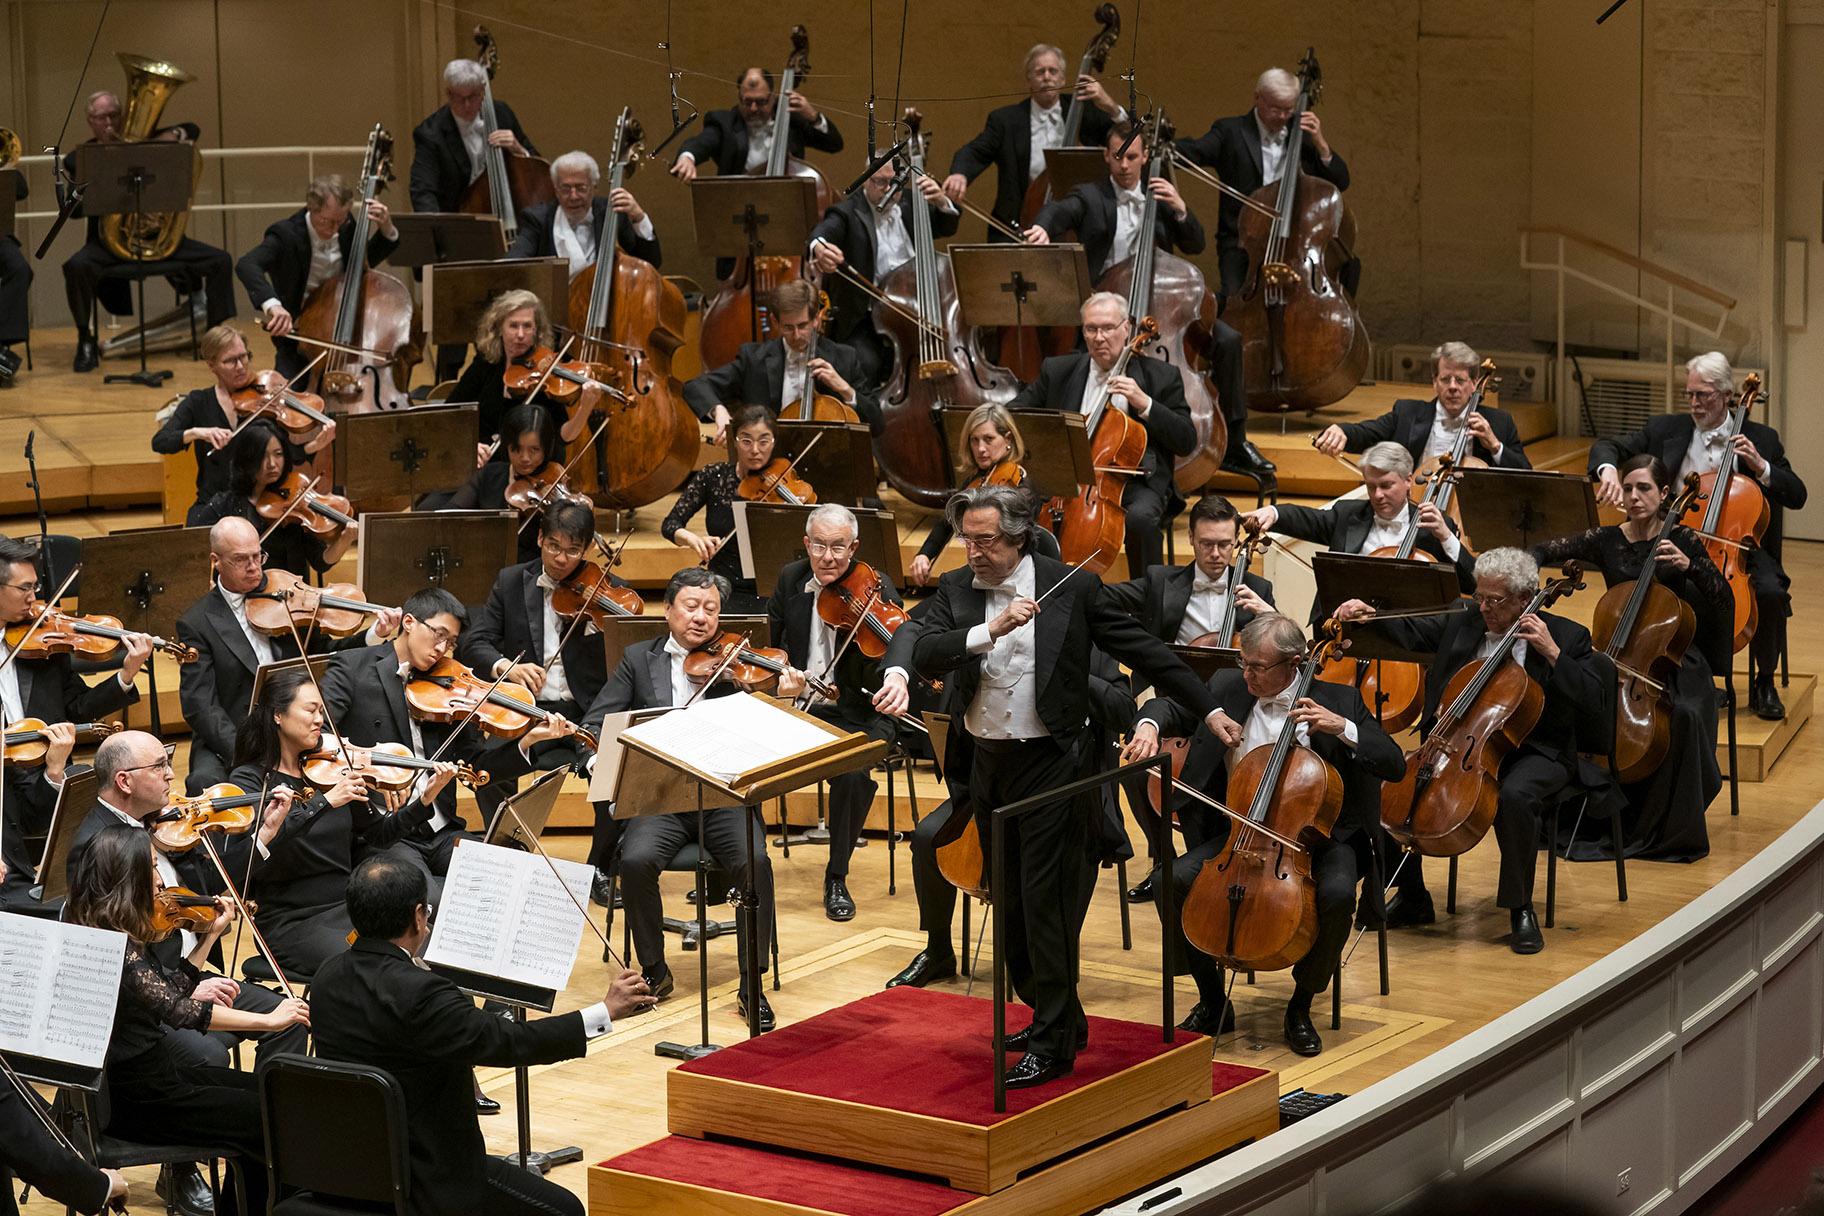 Zell Music Director Riccardo Muti leads the Chicago Symphony Orchestra in Stravinsky’s Suite from “The Firebird.” (Photo credit: Todd Rosenberg)